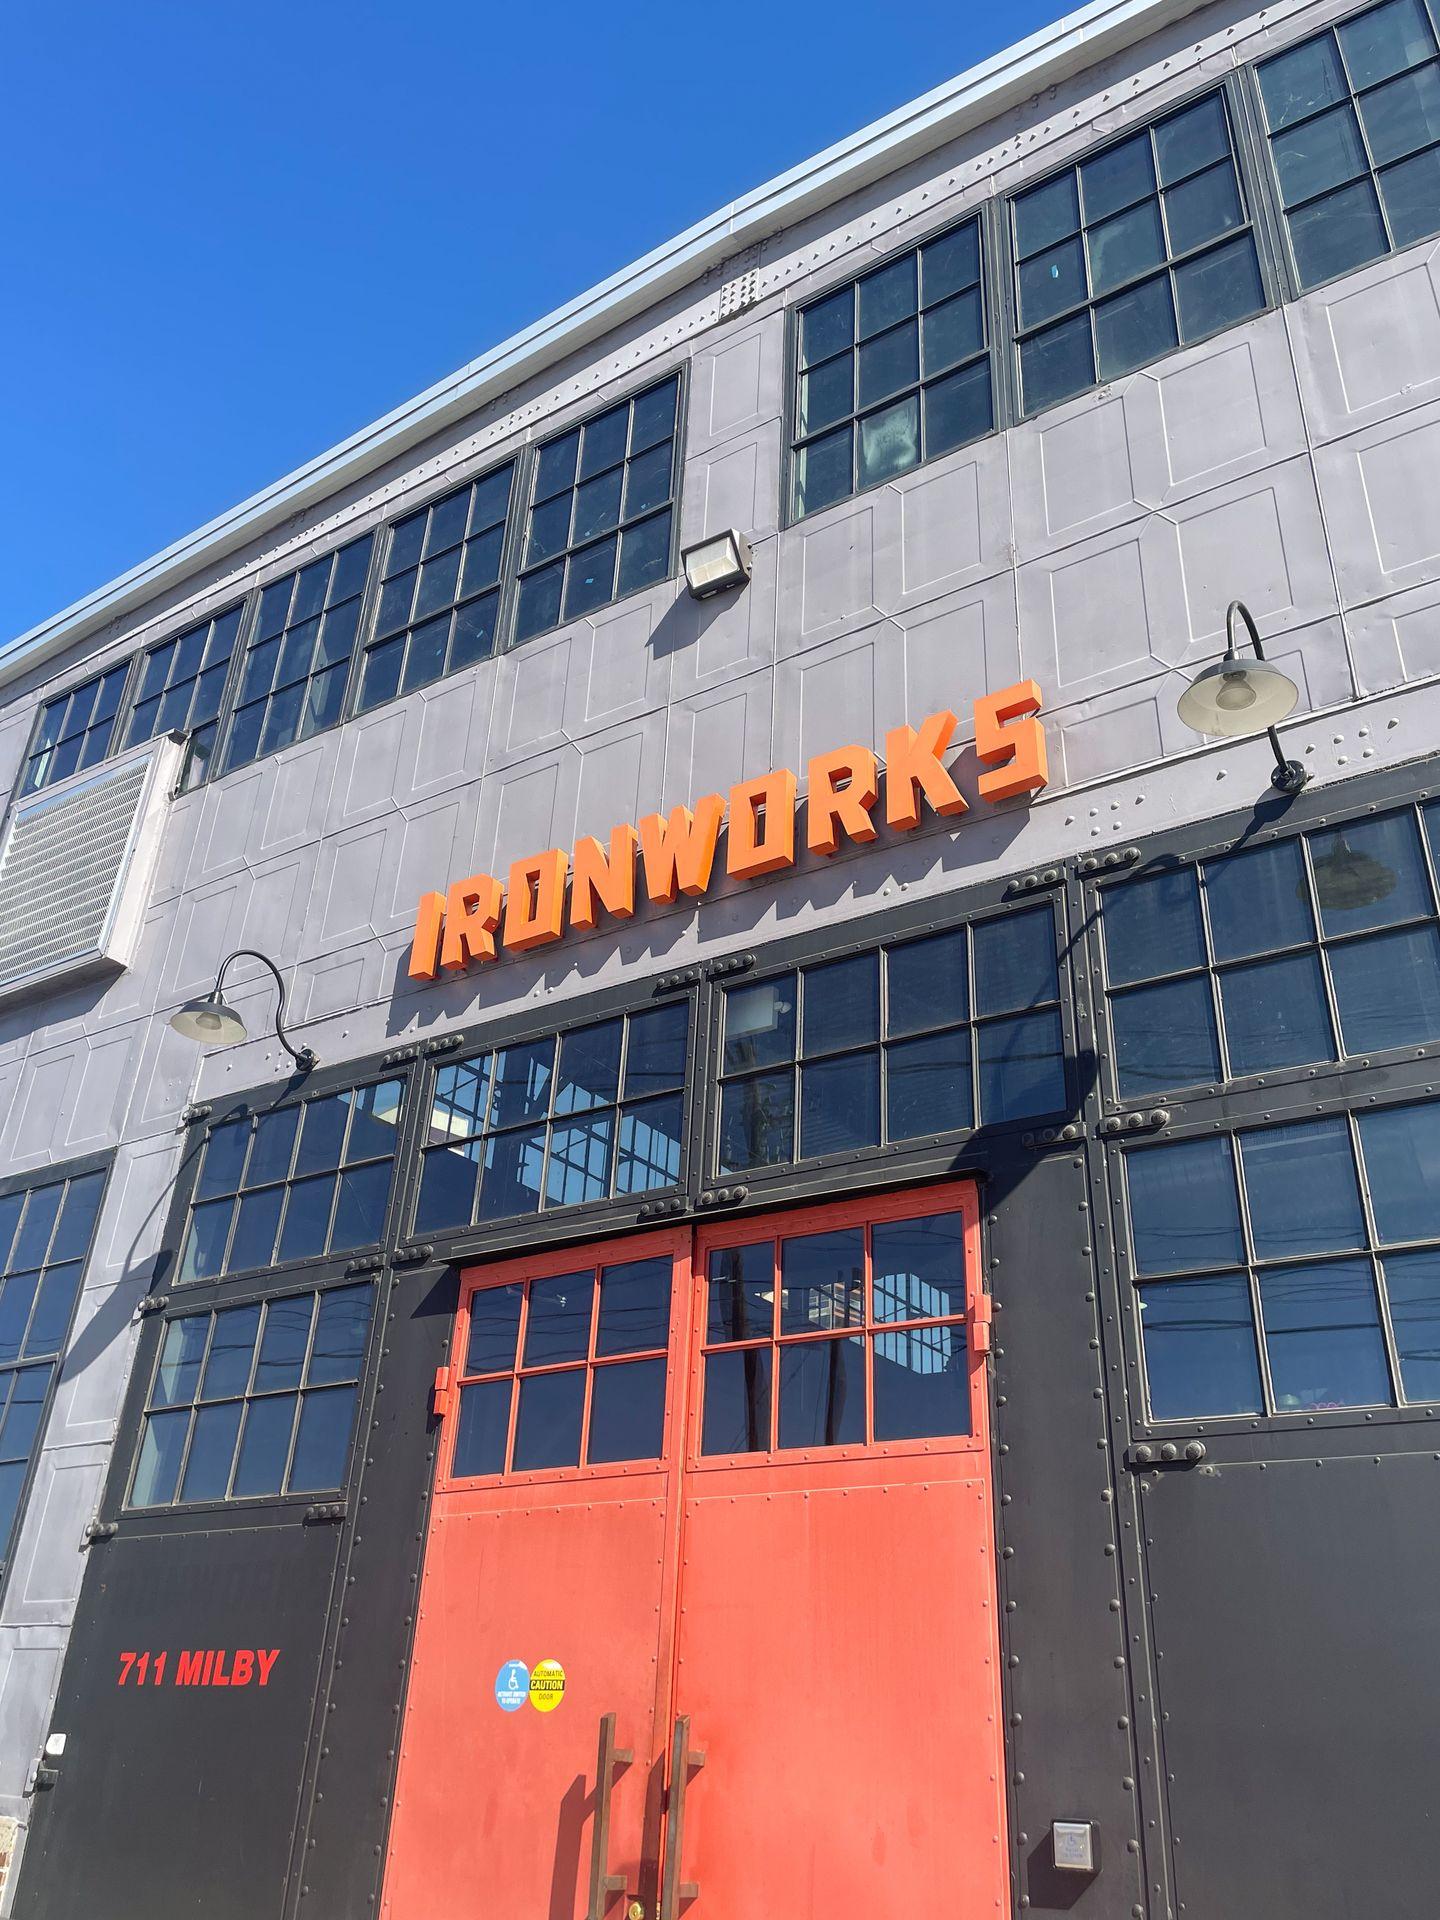 The exterior of the Ironworks building. There are orange doors and it reads 'Ironworks' in orange letters.